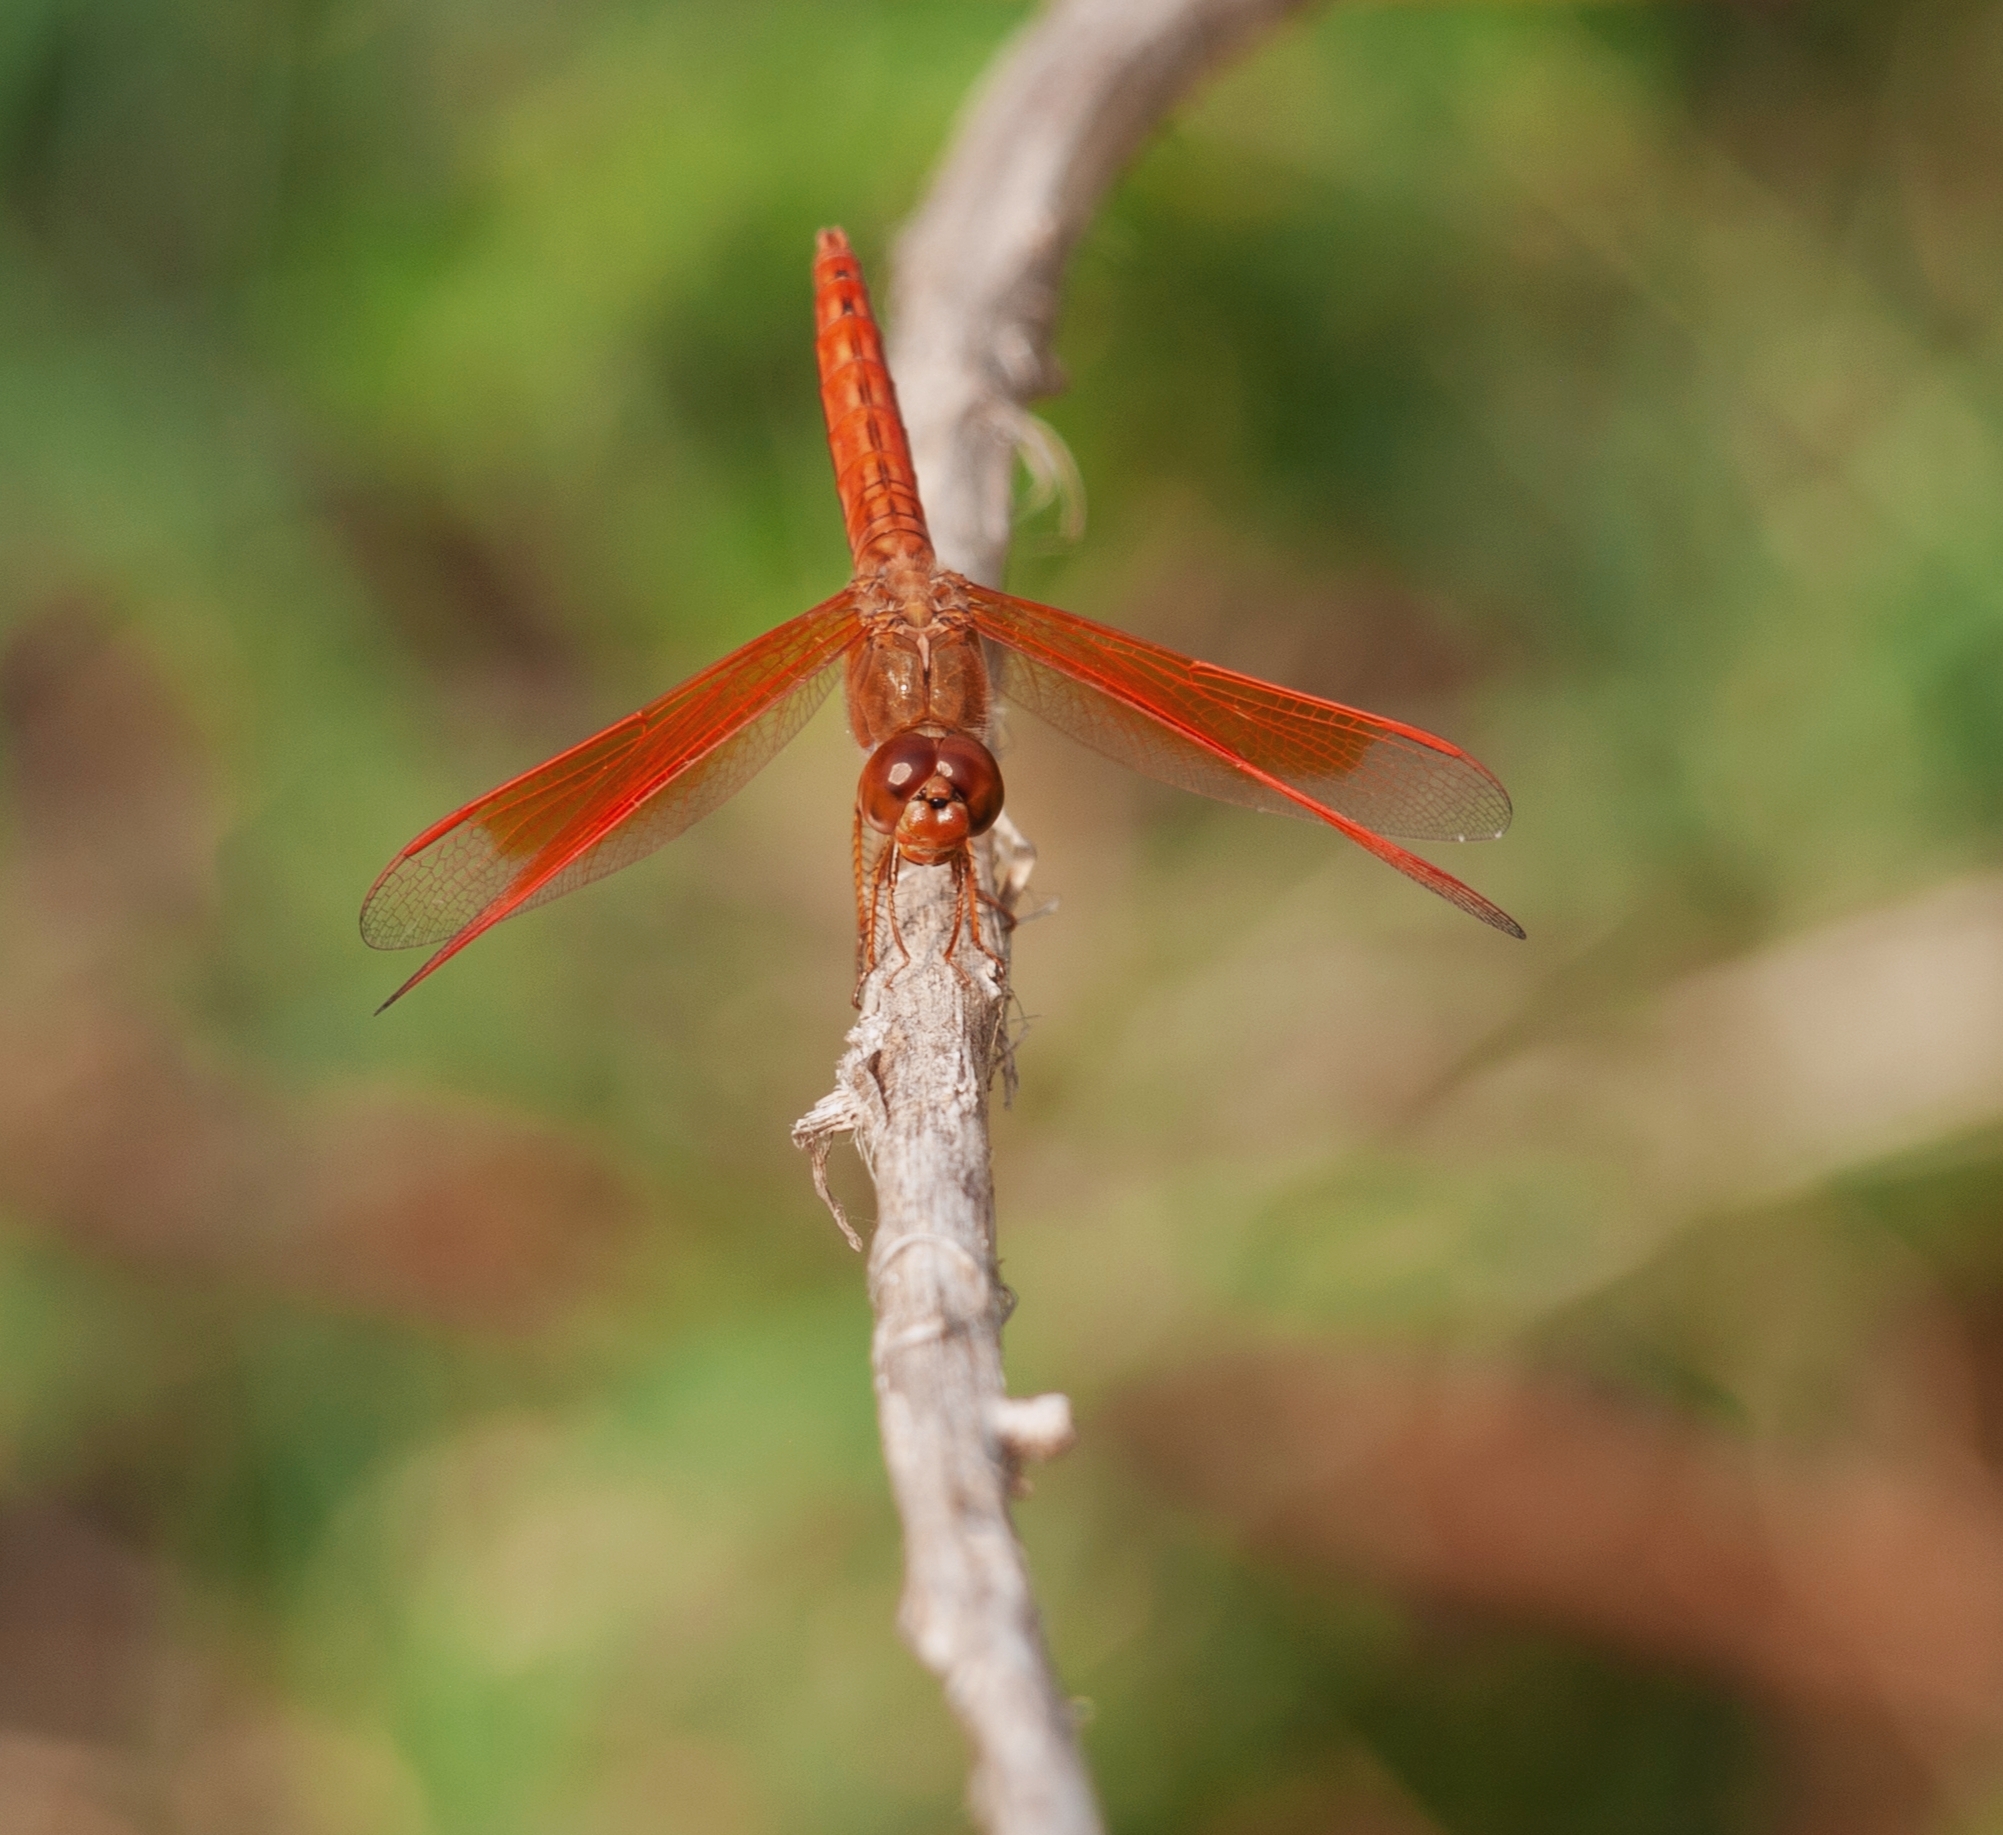 Colorful dragonfly sitting on a stem